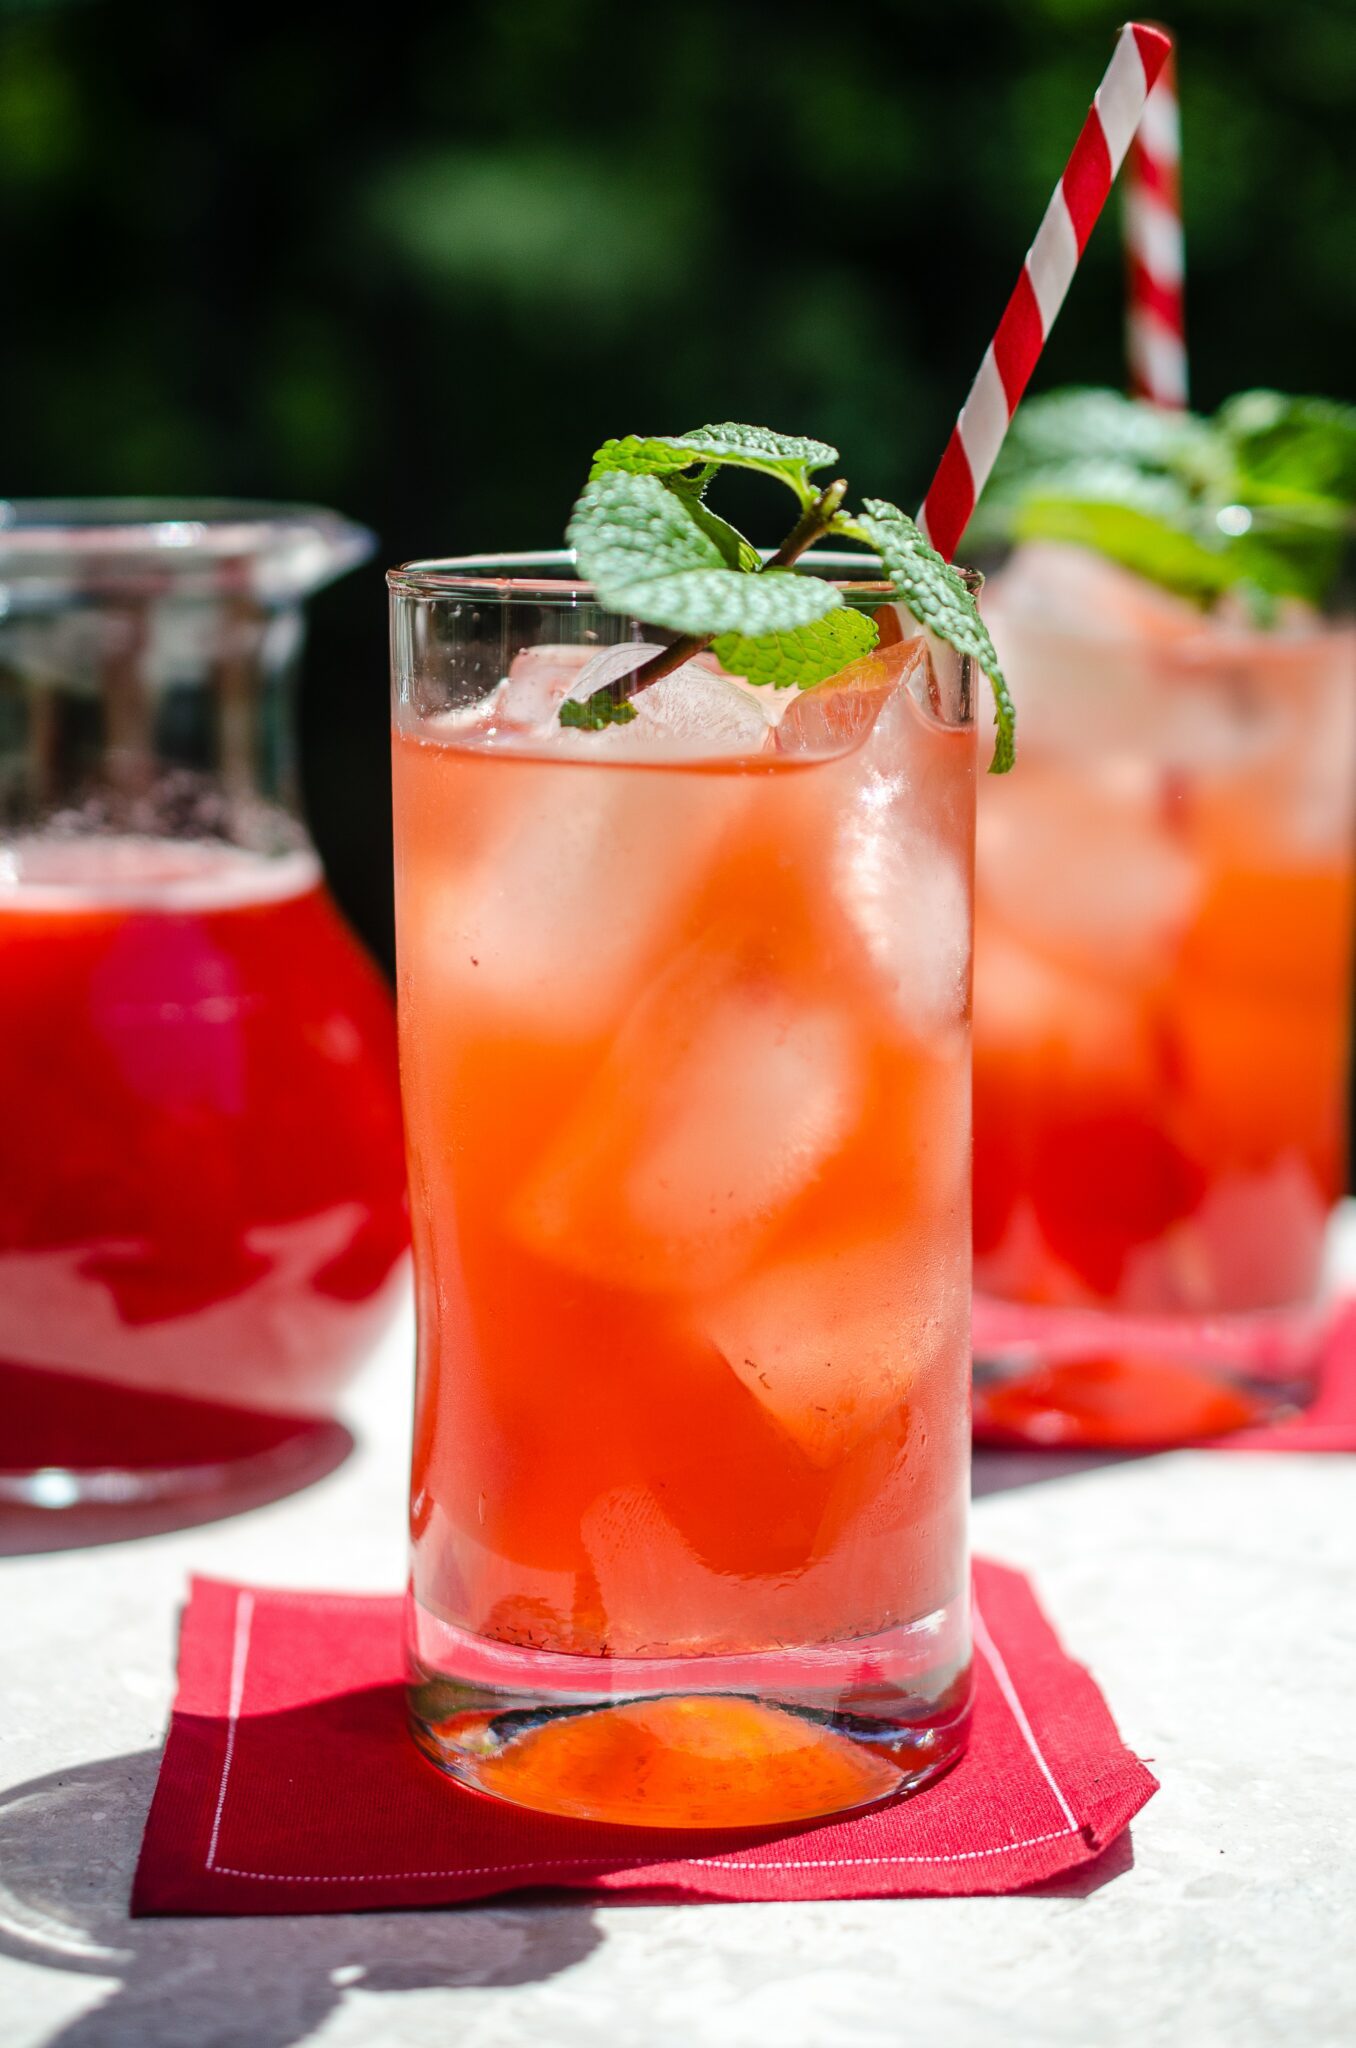 You are currently viewing Strawberry Shrub aka “The Shelby”